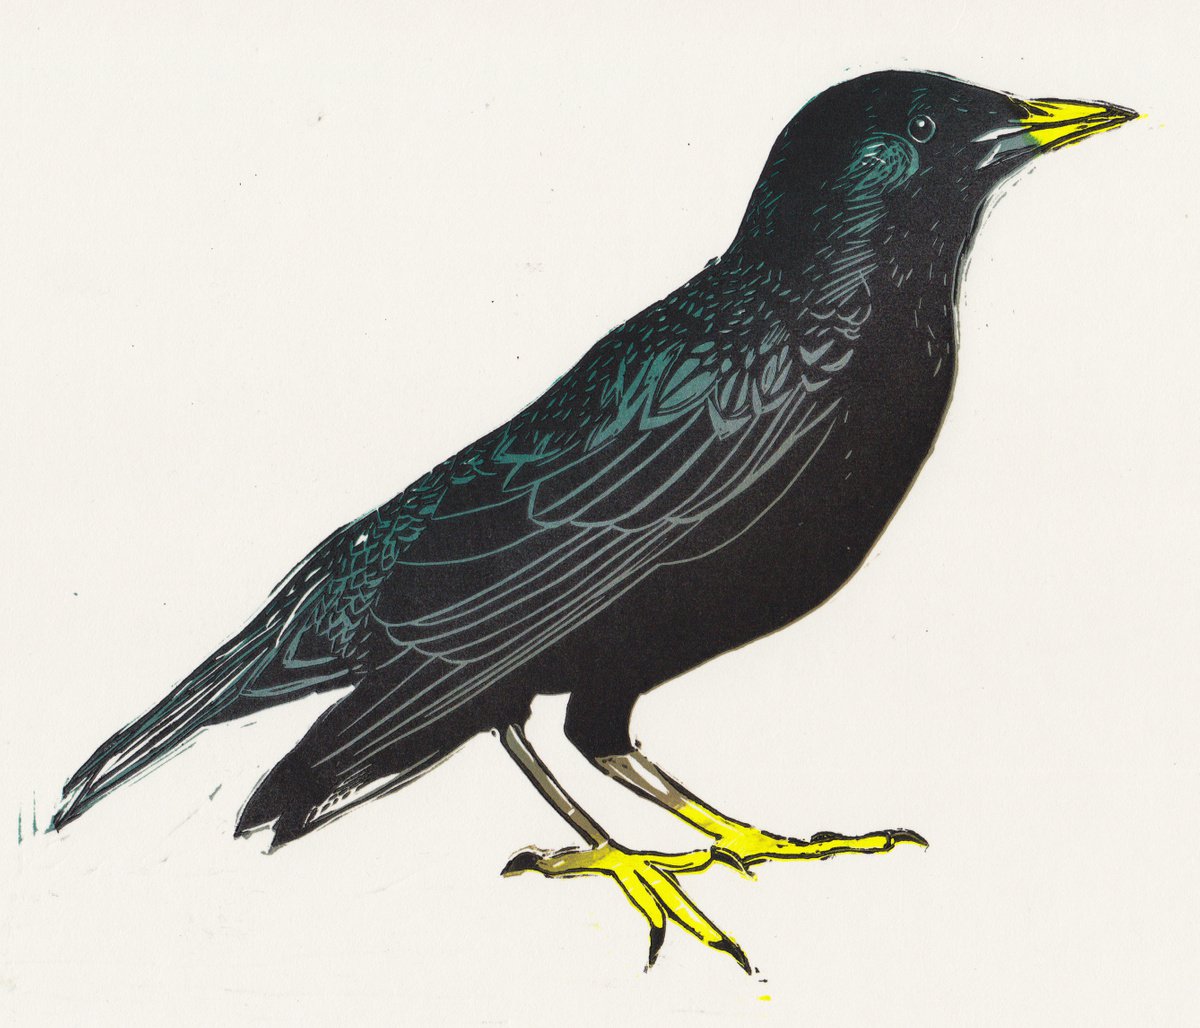 Starling by Georgia Flowers